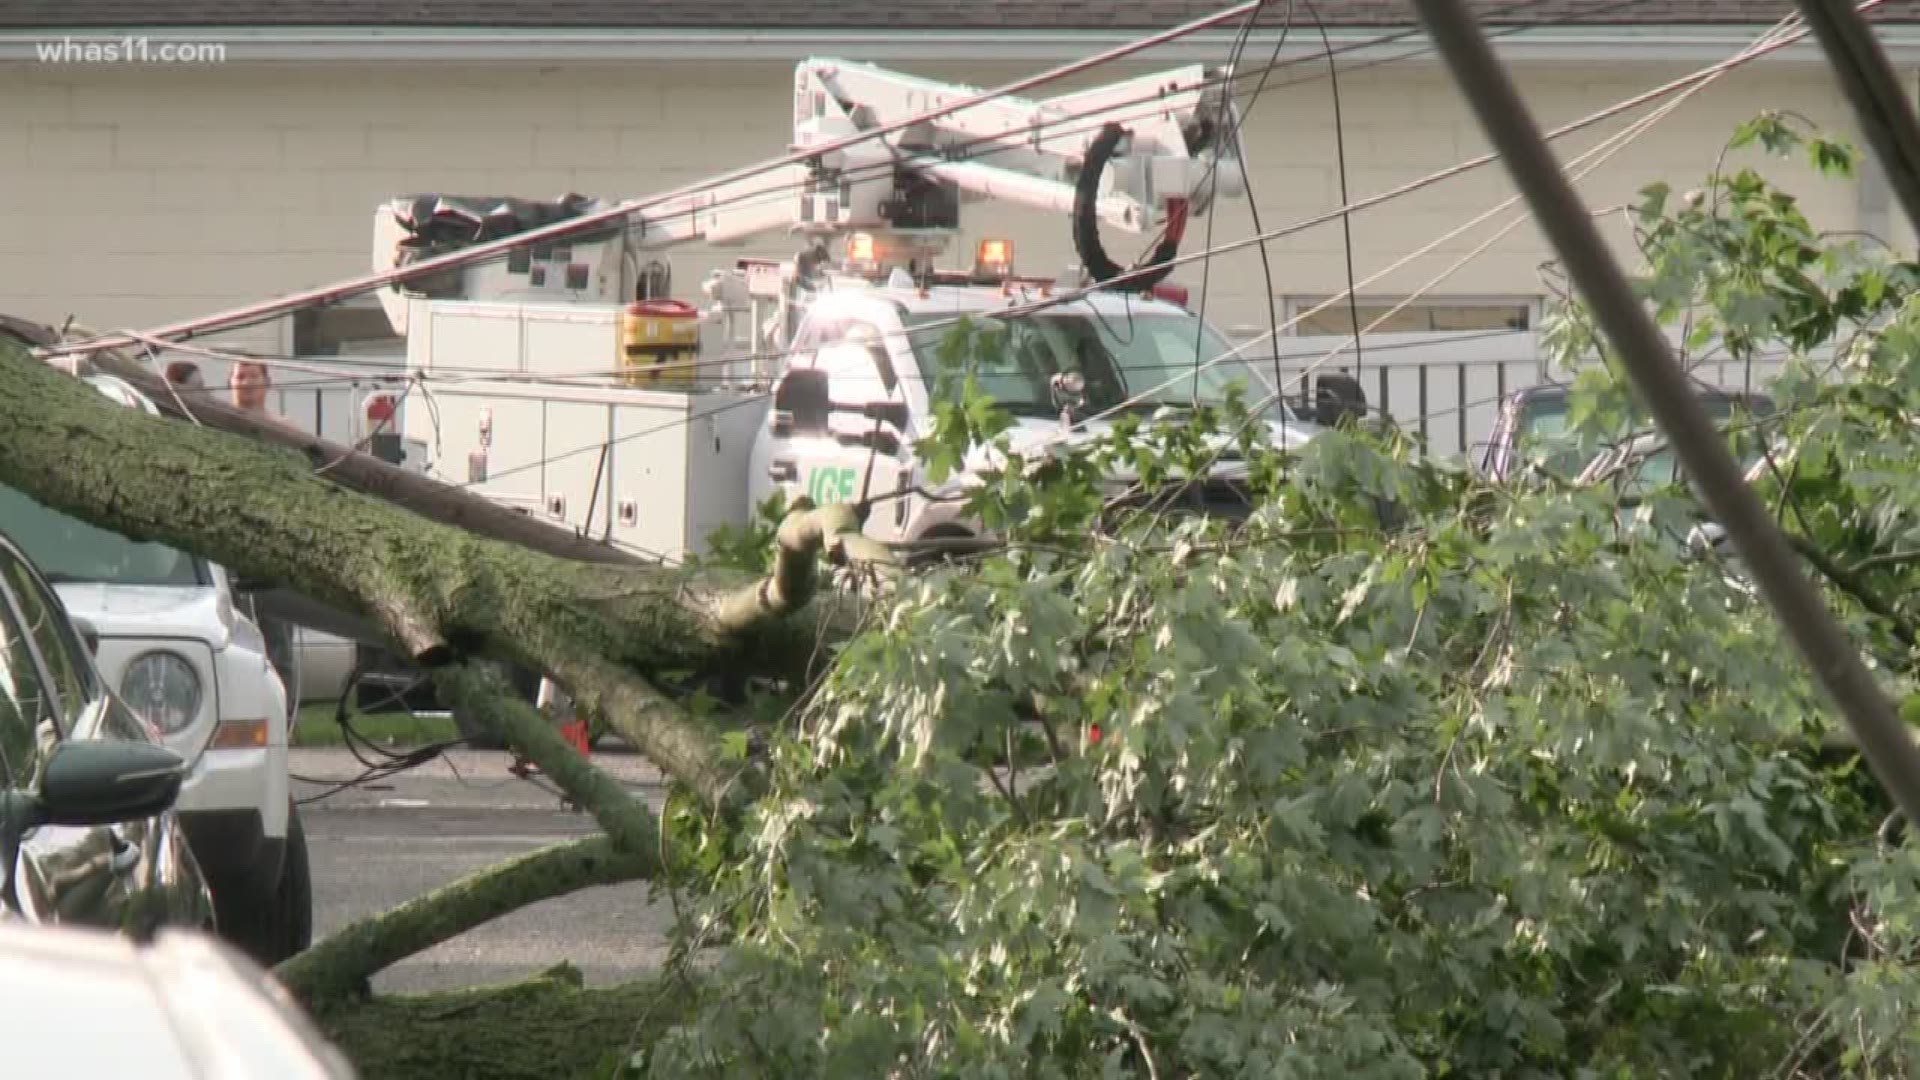 Kentuckiana begins cleanup after storms rolled through the area causing damage.